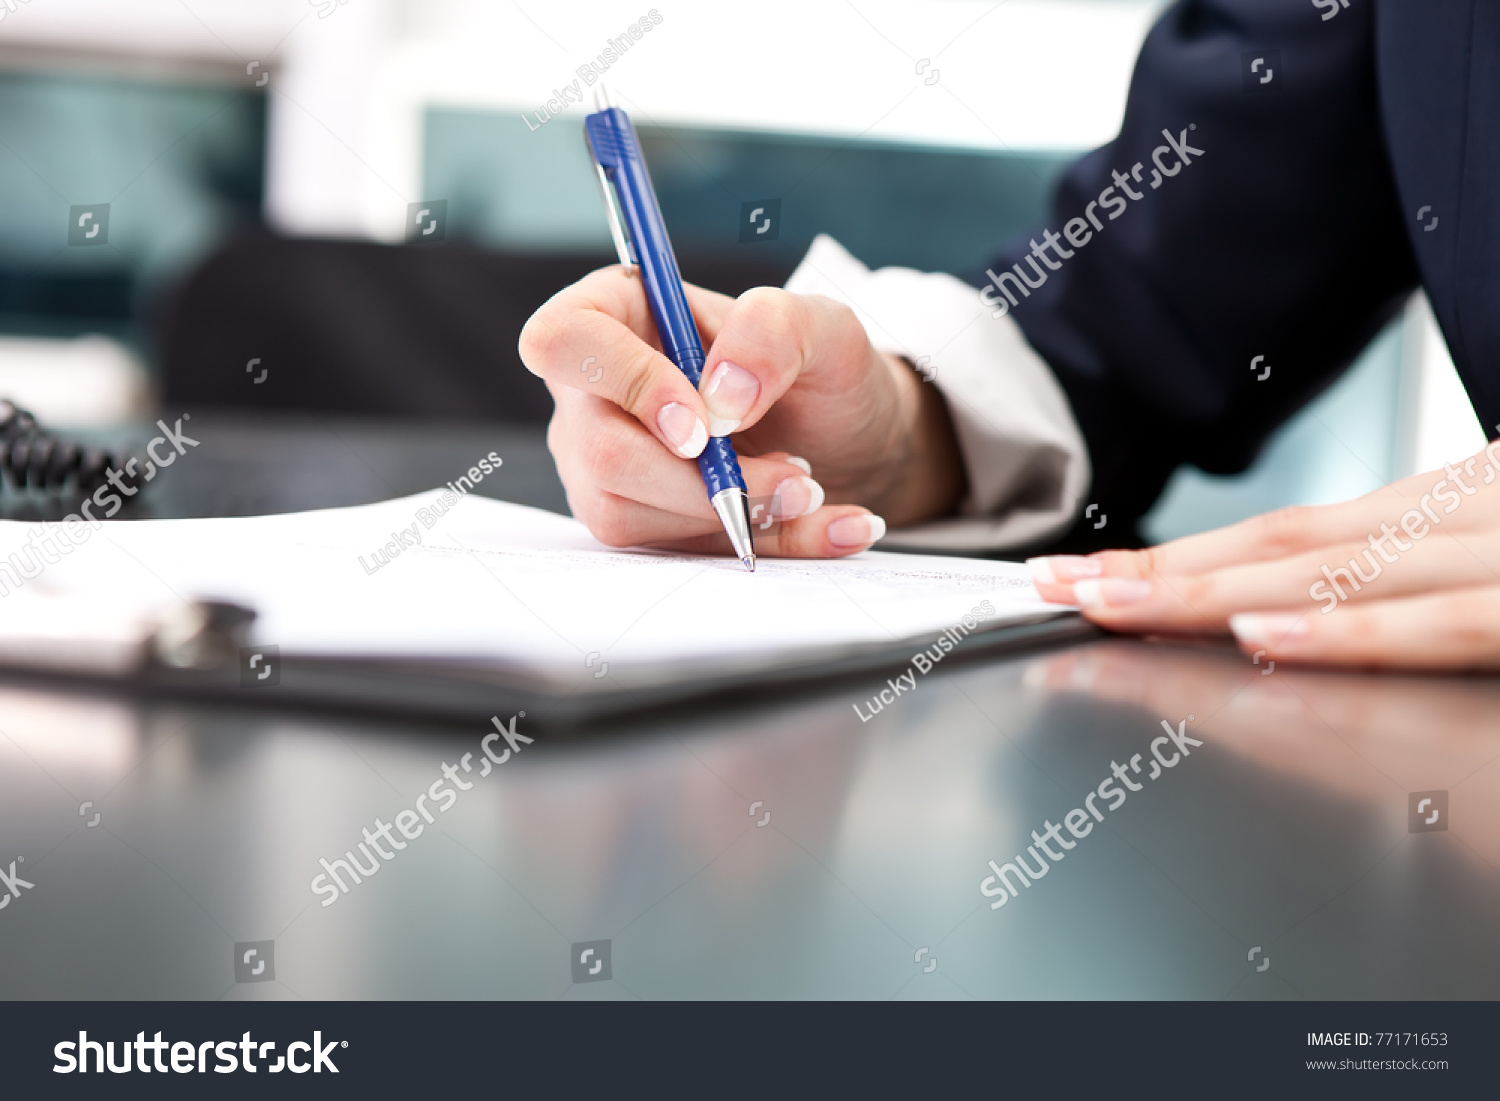 Womans Hand Pen Signing Document Close Stock Photo 77171653 - Shutterstock